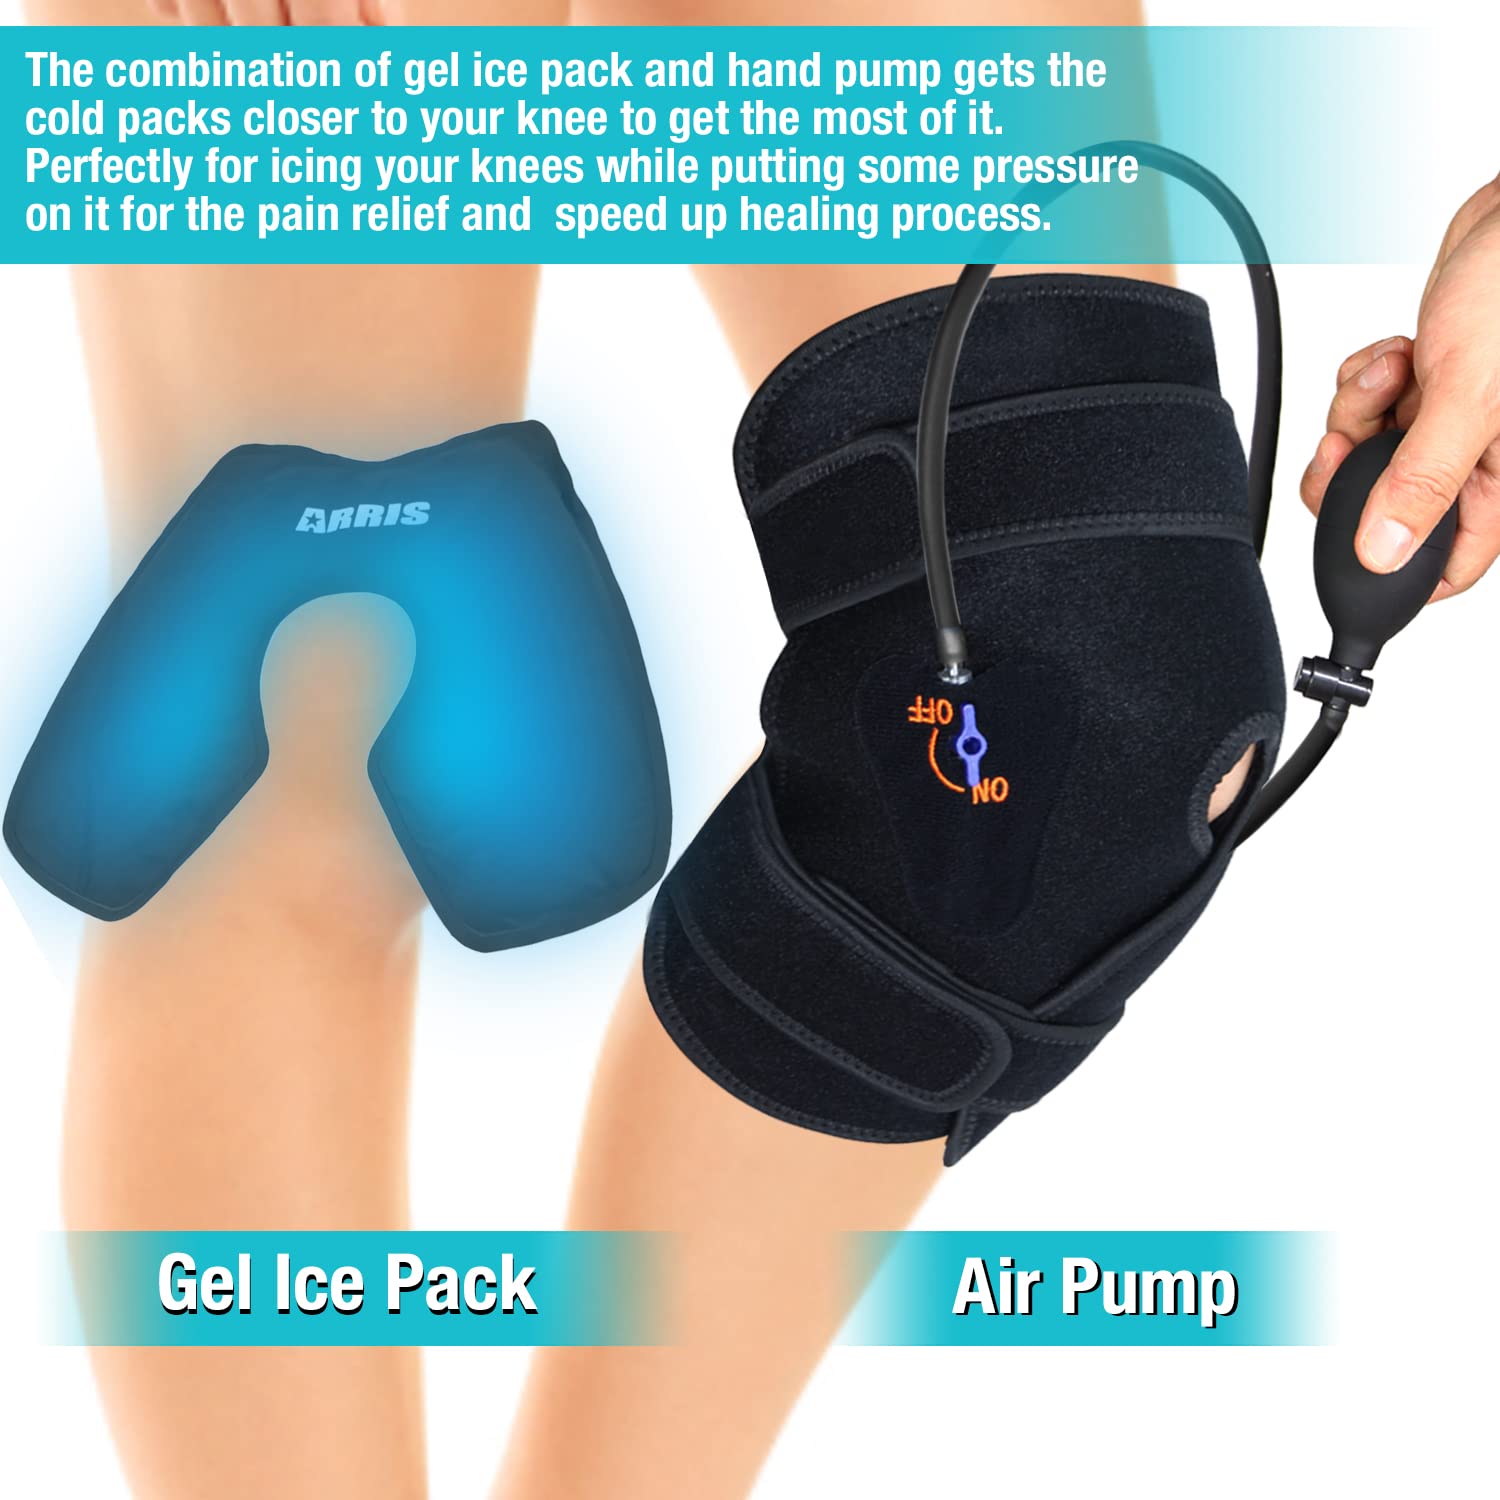 ARRIS Knee Ice Pack Wrap - Cold Compression Knee Brace with Pump - Hot Cold Therapy for Pain Relief